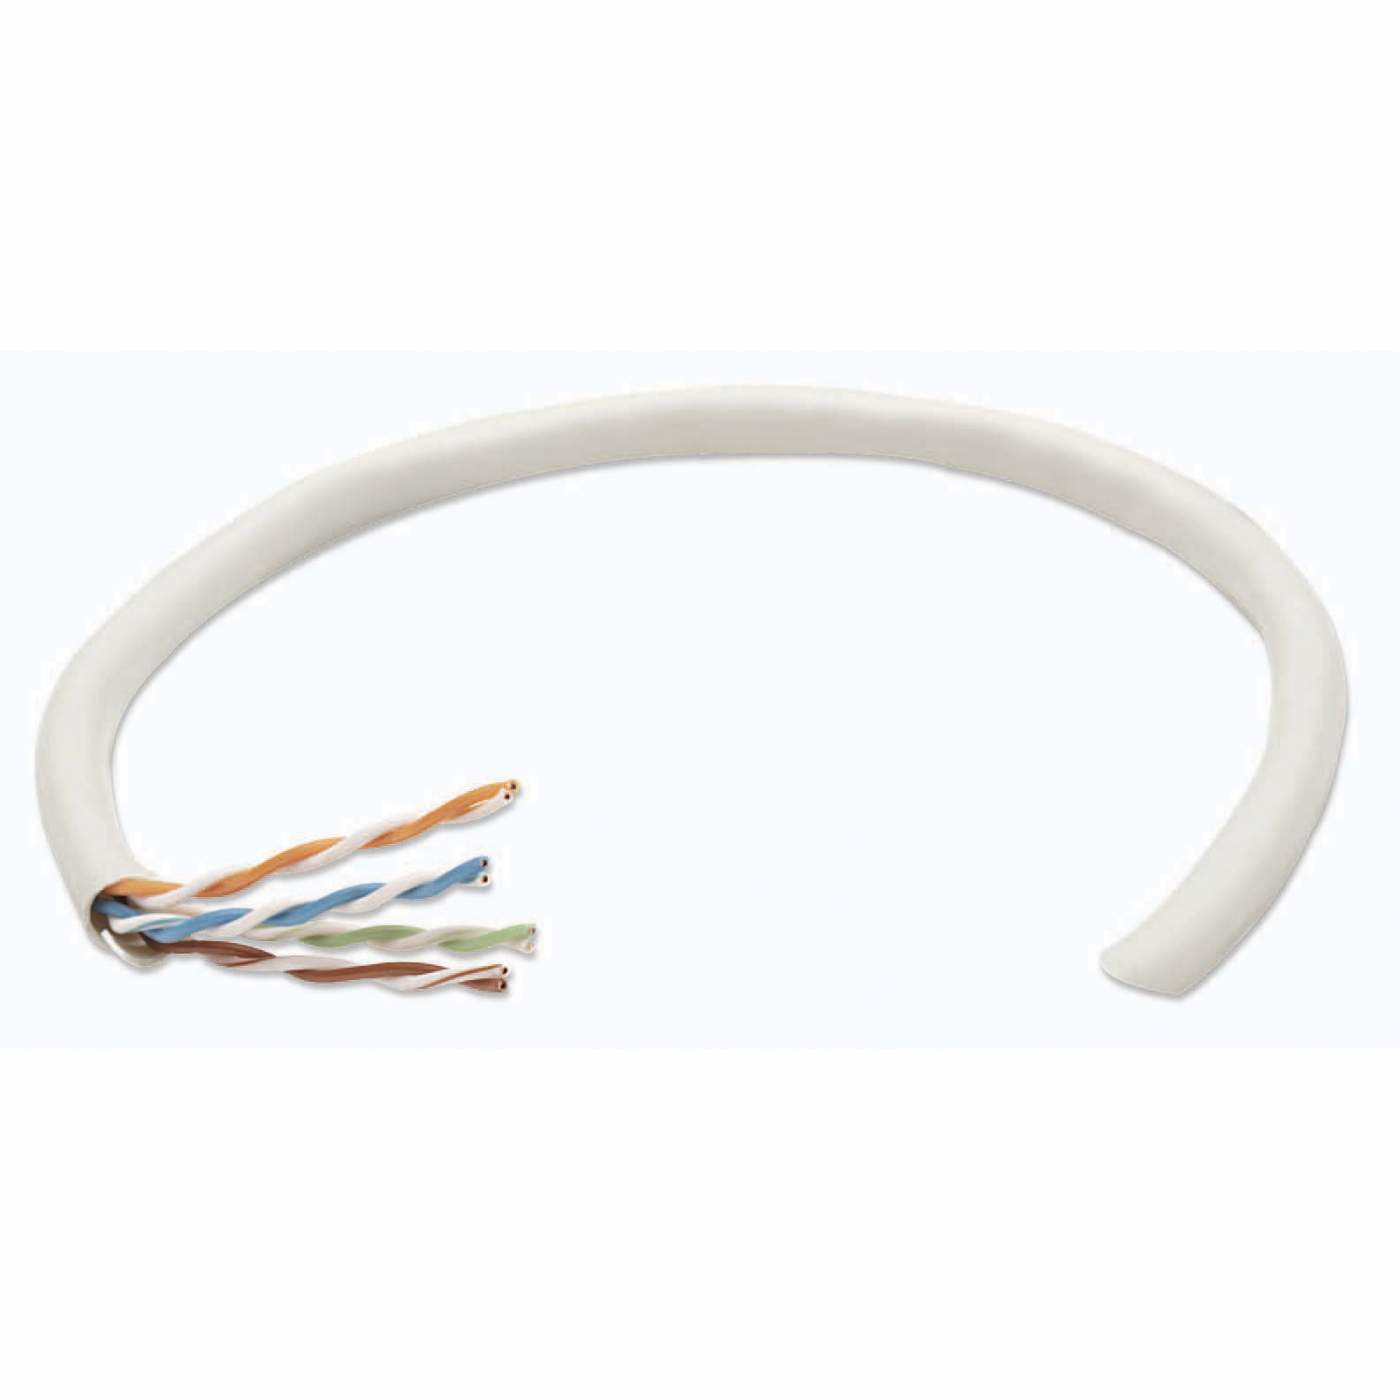 Photos - Cable (video, audio, USB) INTELLINET Network Bulk Cat6 Cable, 23 AWG, Solid Wire, 305m, Grey, CC 704 